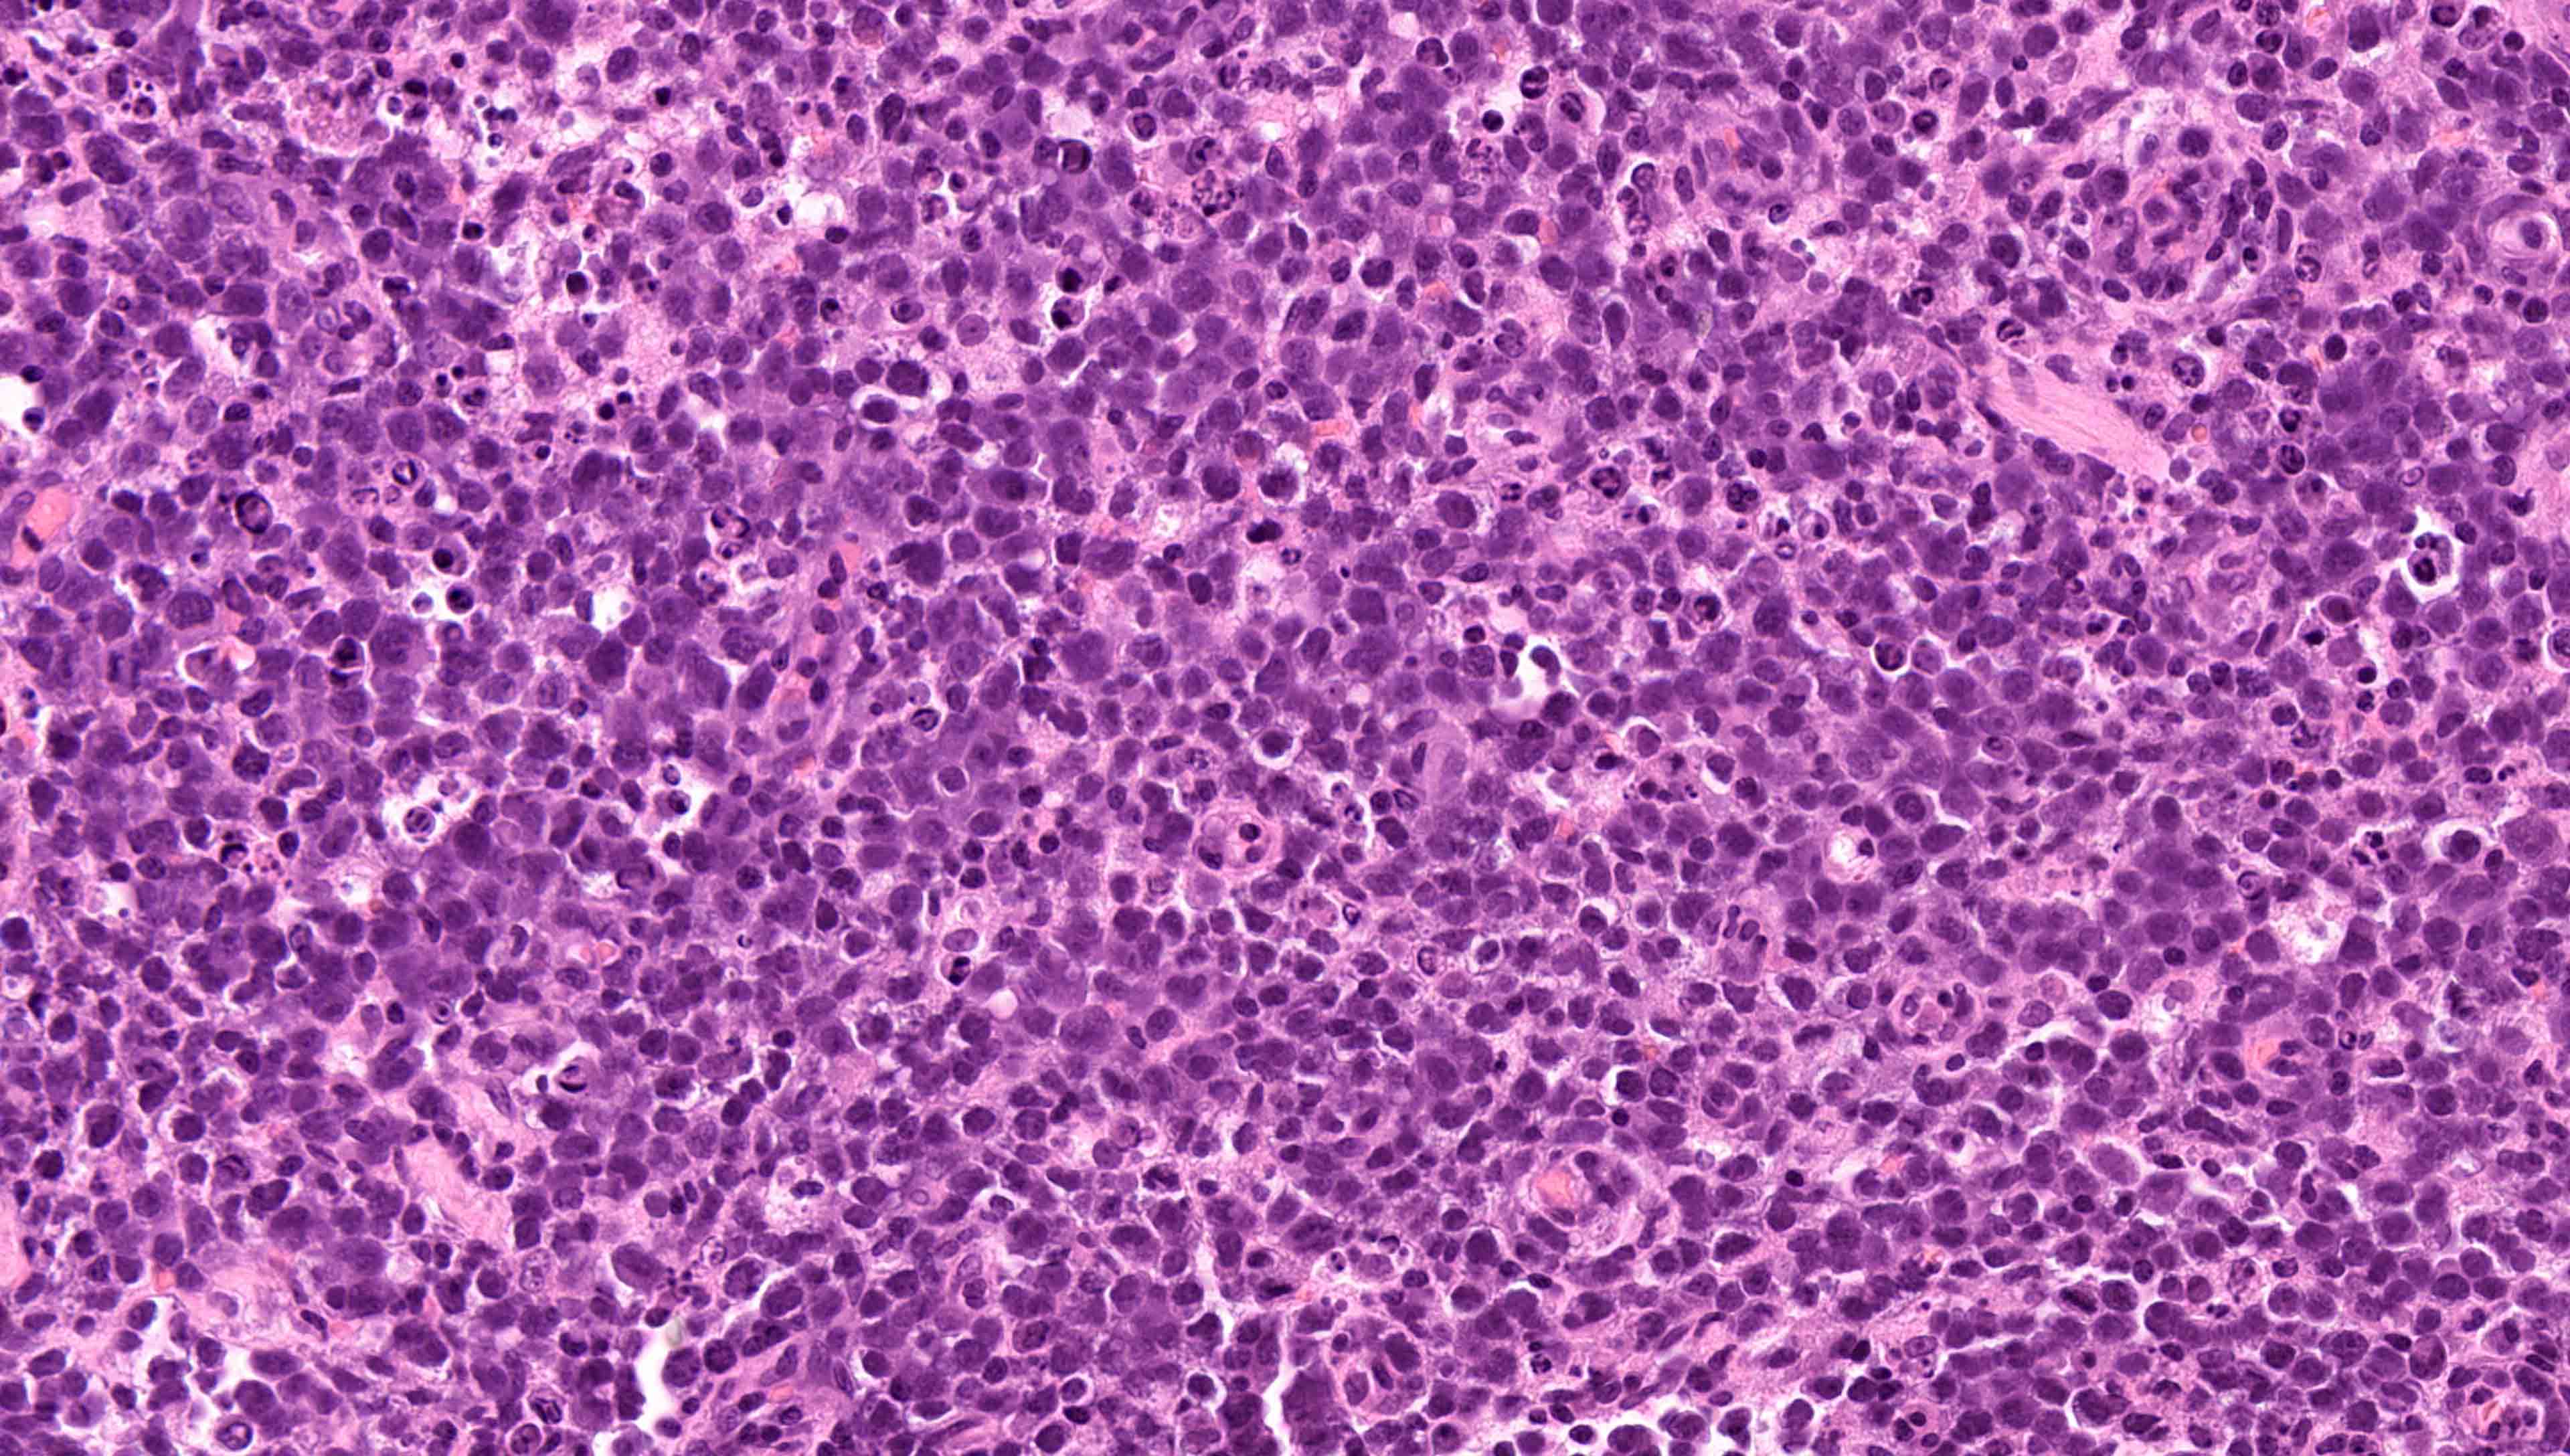 Atypical large lymphoid cells